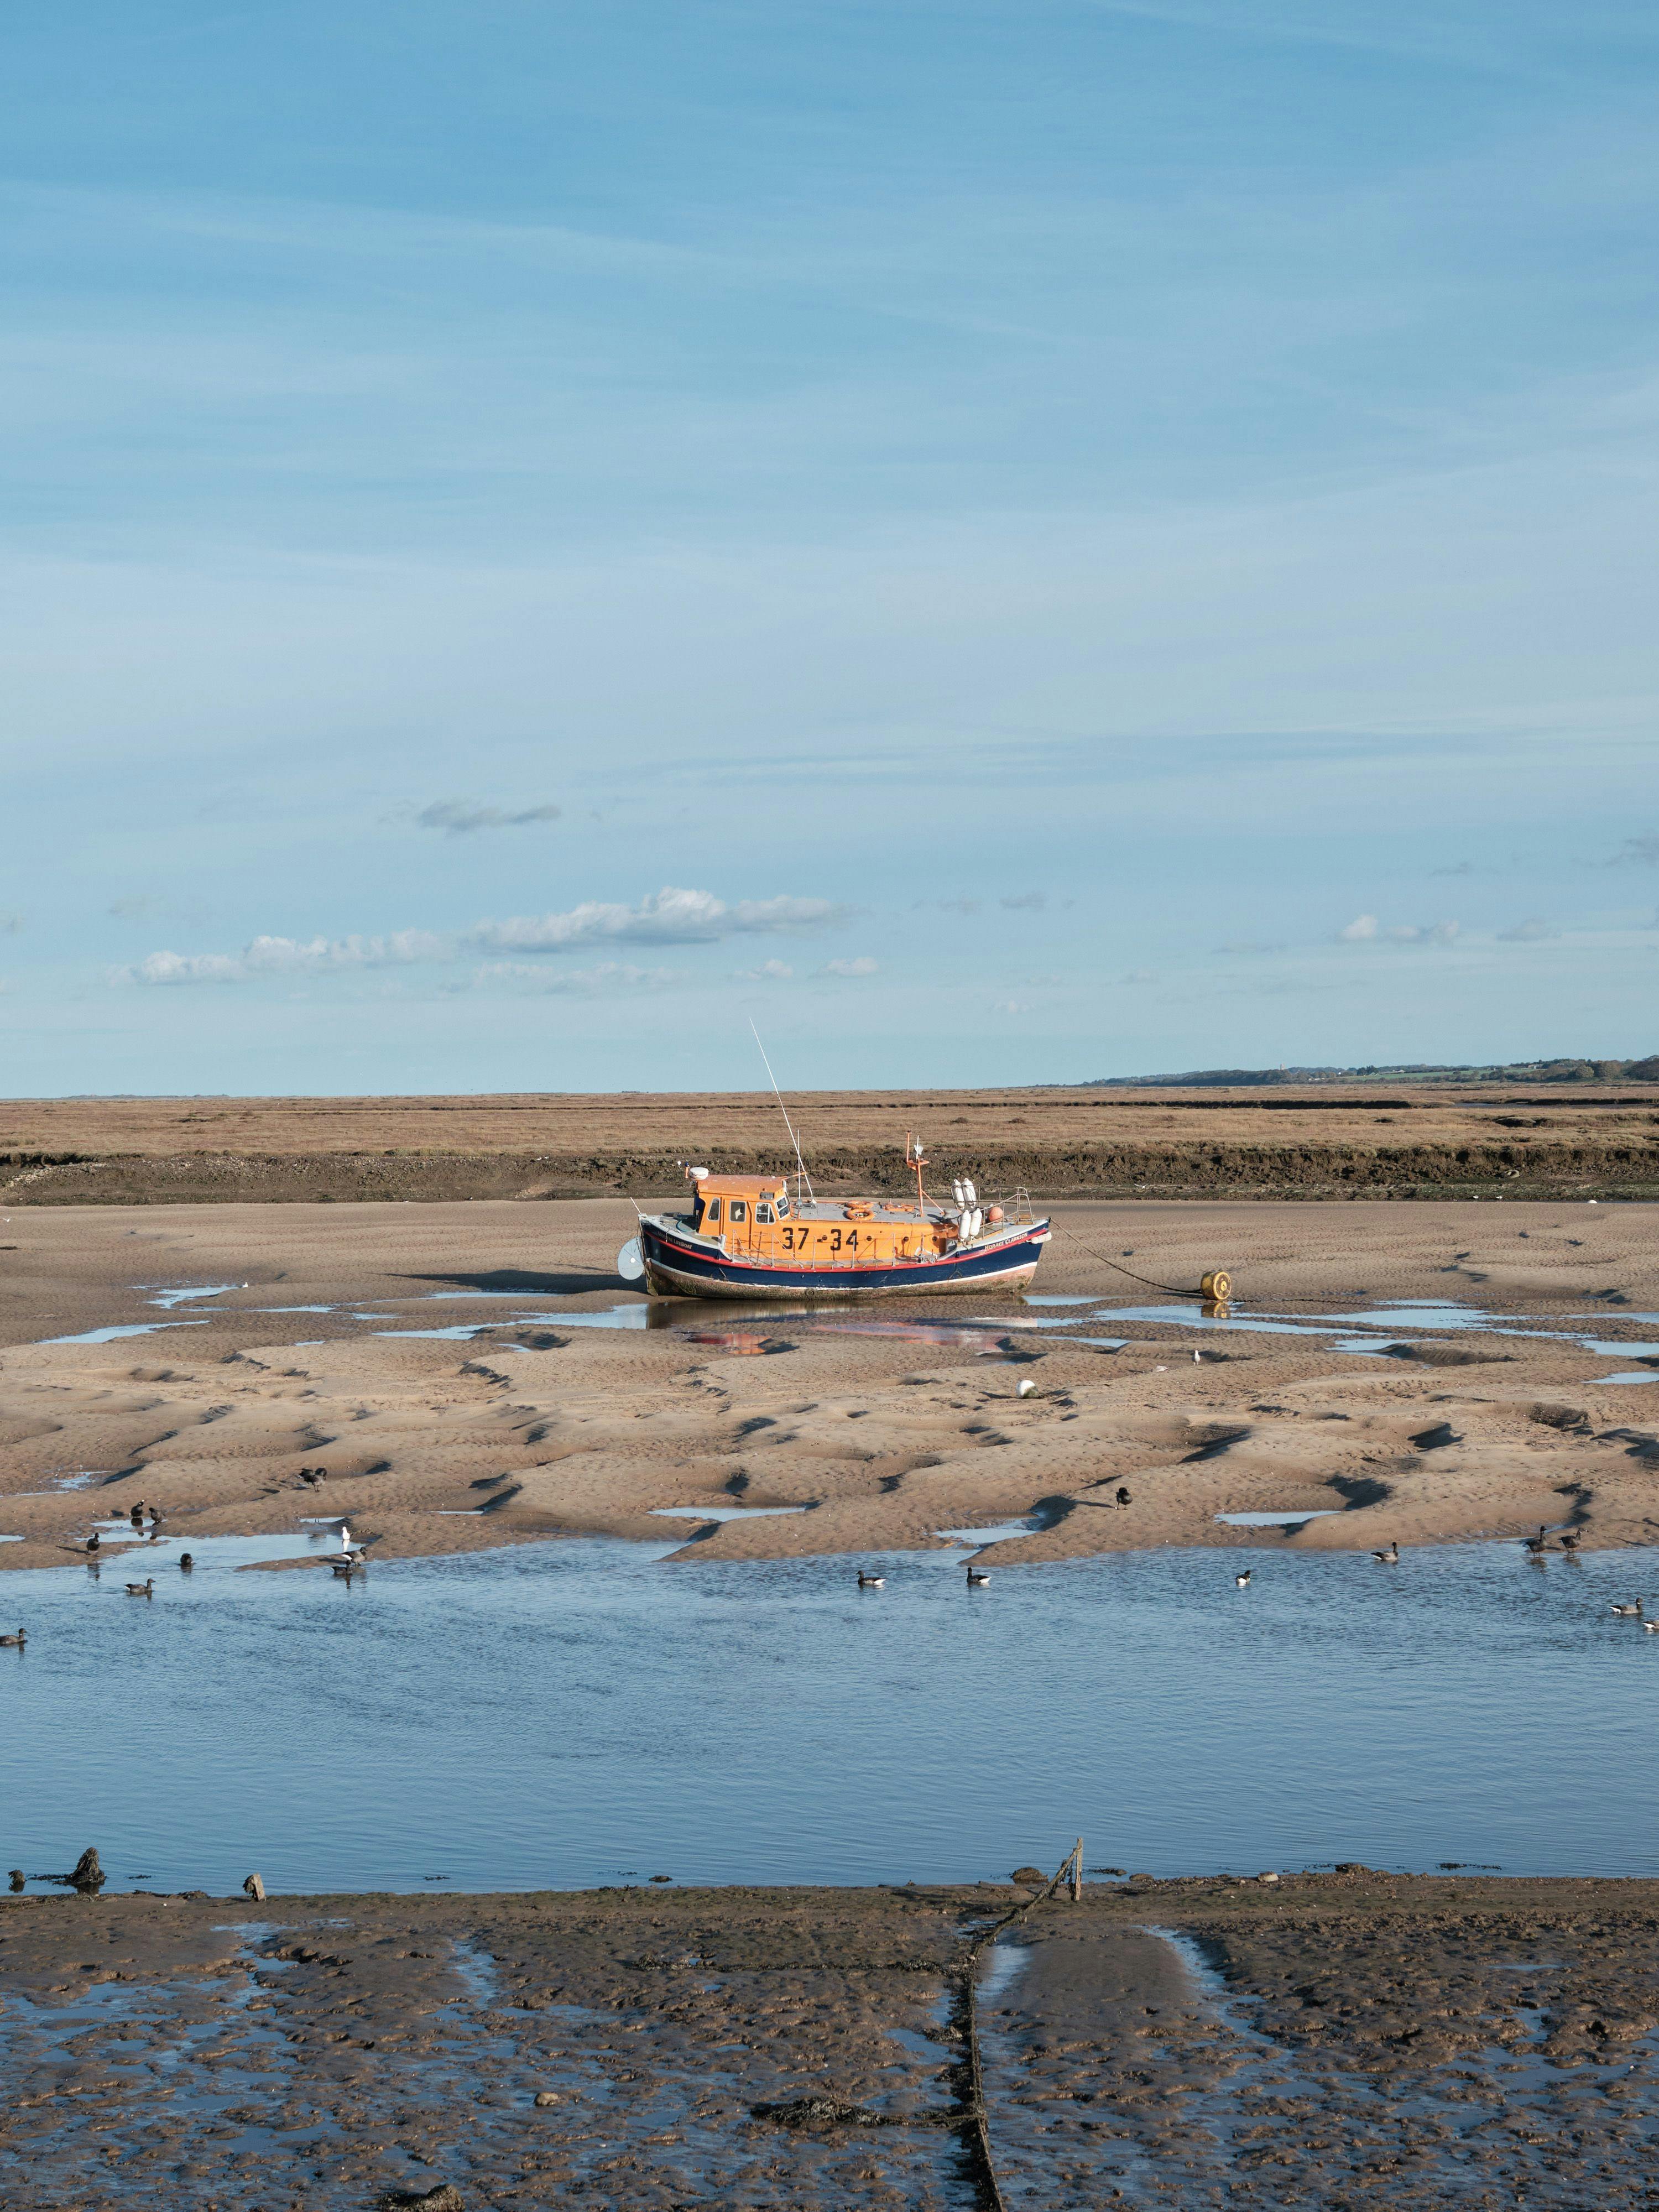 A lifeboat resting on the sand as the tide has gone out. The orange of the boat contrasts with the blue of the sky and yellowy sand